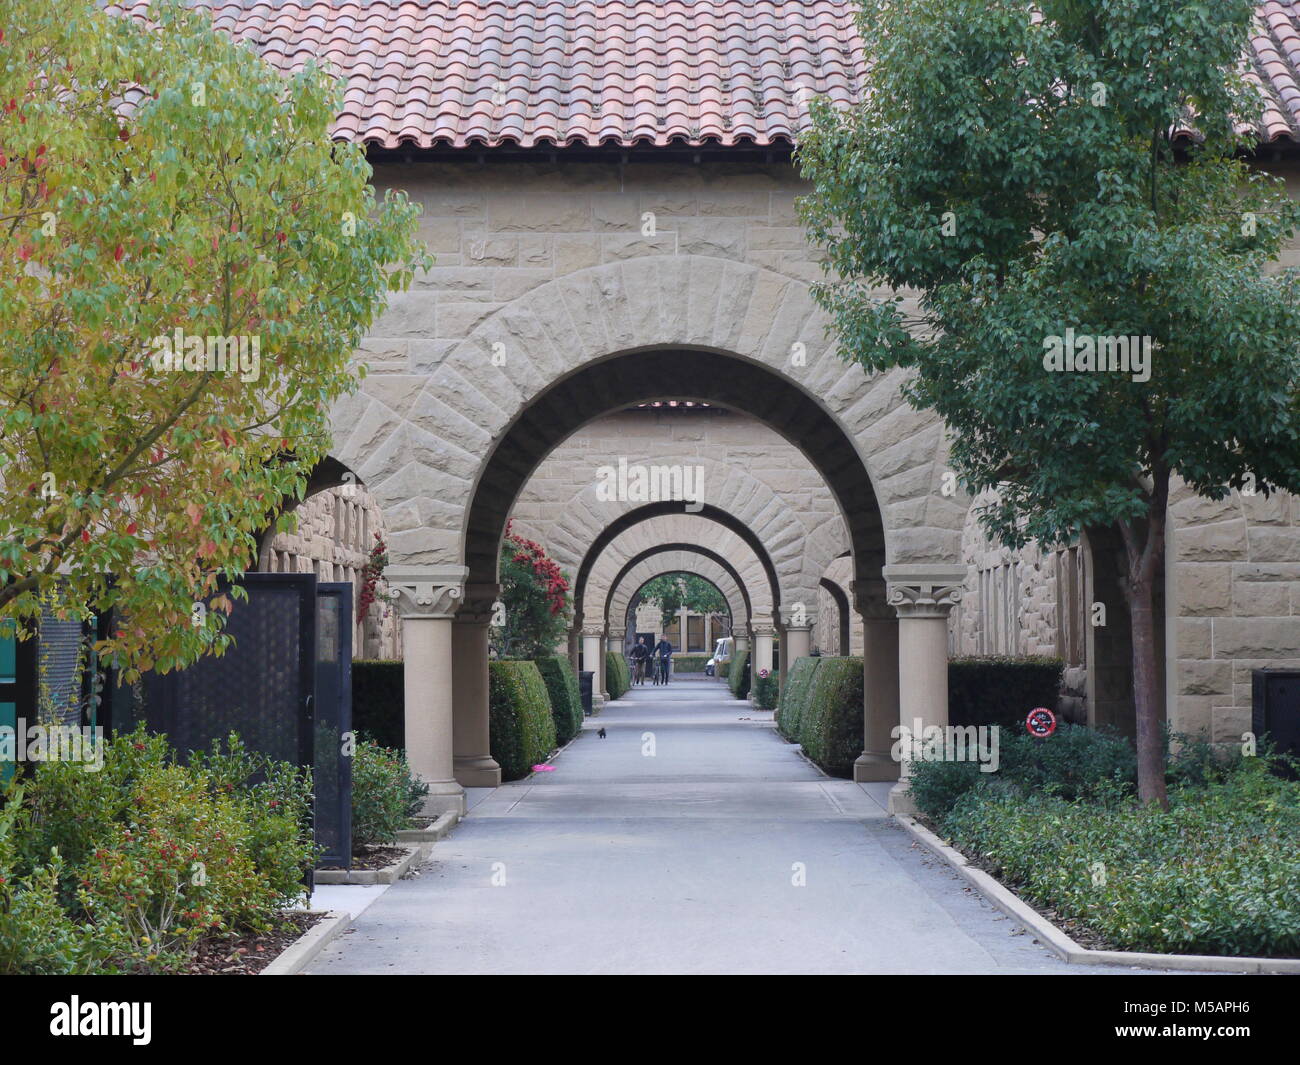 Stanford university campus during winter hollidays Stock Photo